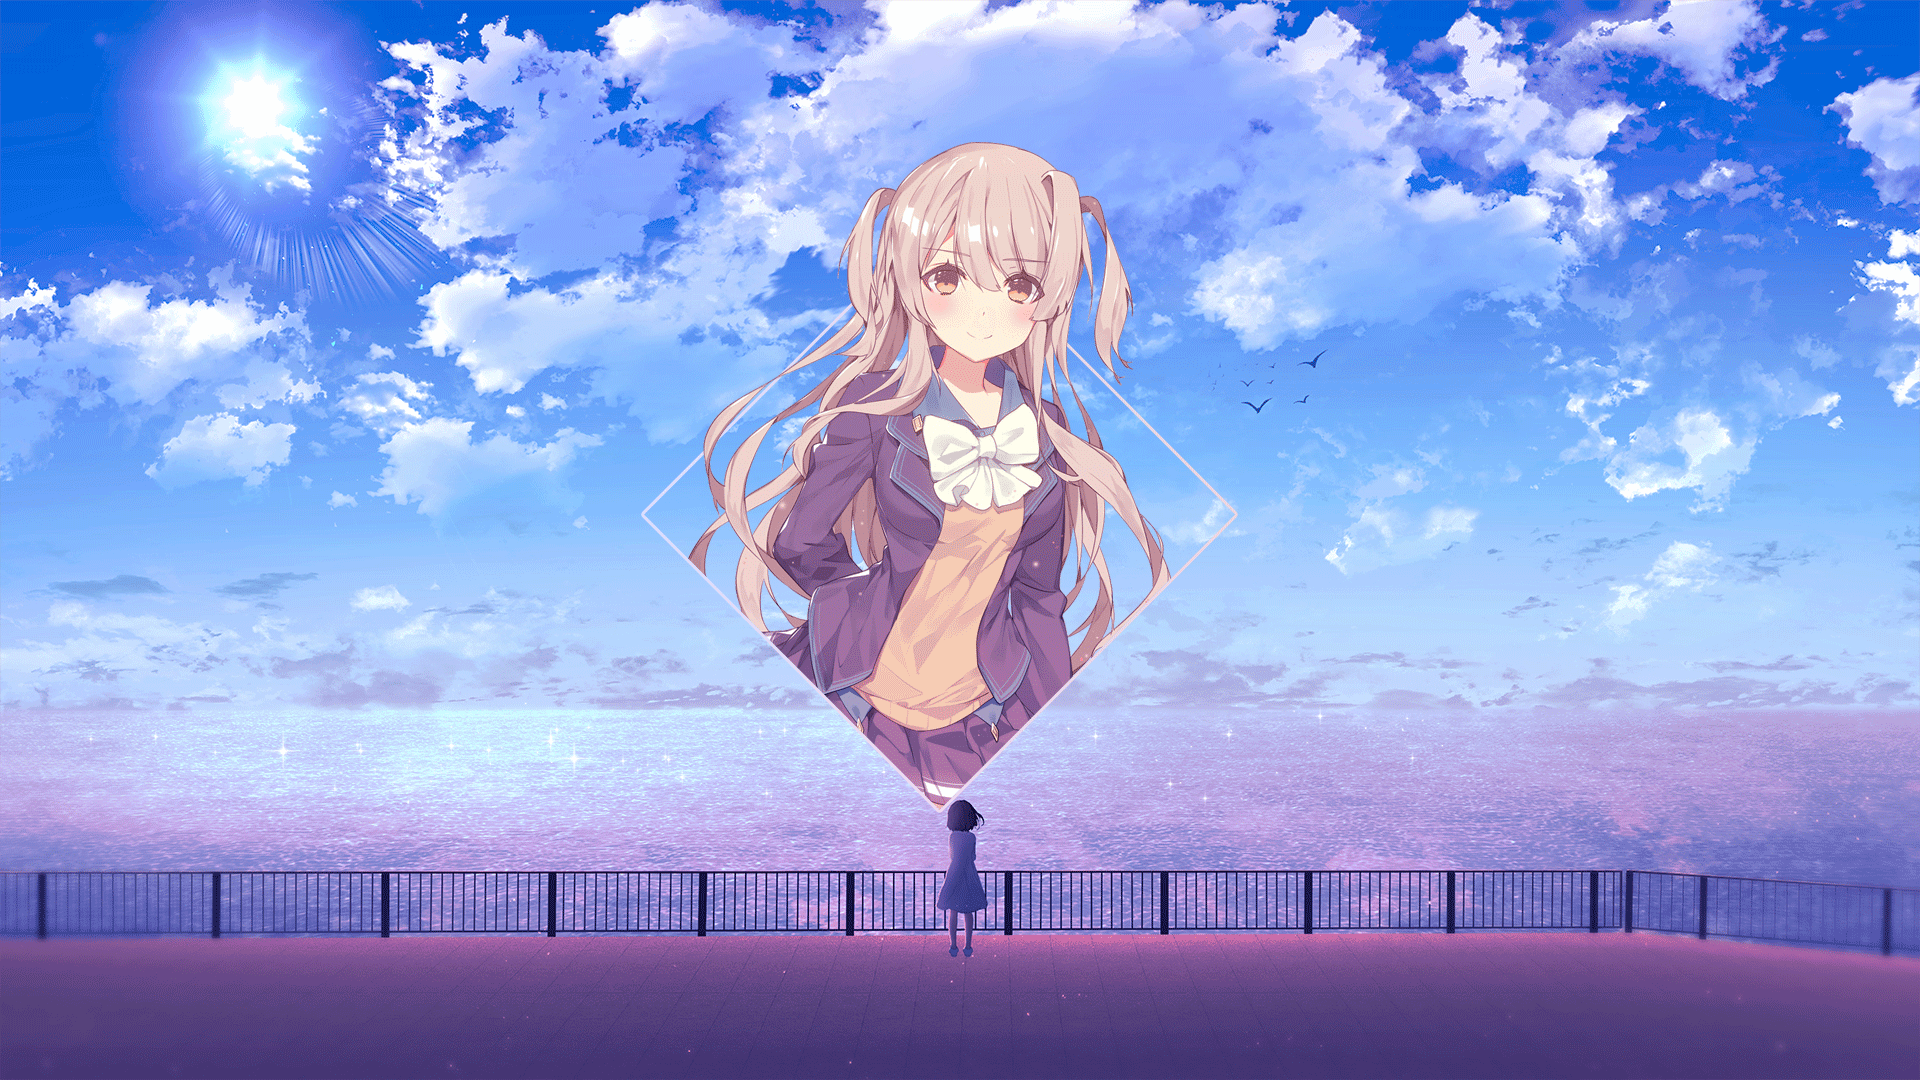 Anime Anime Girls Clouds Sea Anime Landscape Photoshop Digital Art Picture In Picture Picture School 1920x1080